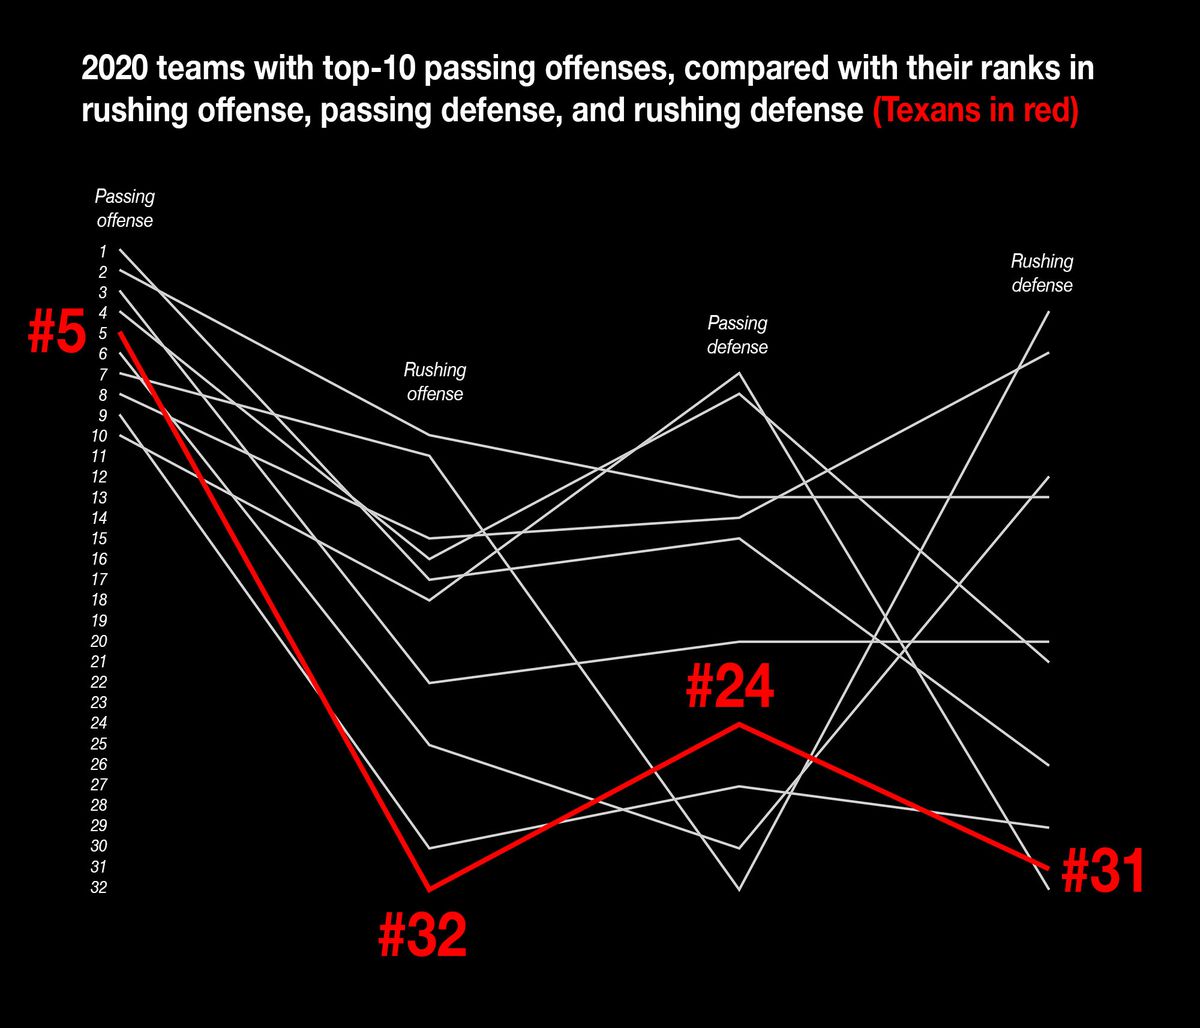 Chart: 2020 teams with top-10 passing offenses, showing also their ranks in rushing offense, passing defense, and rushing defense. The Texans are #5 in passing offense, #32 in rushing offense, #24 in passing defense and #31 in rushing defense.